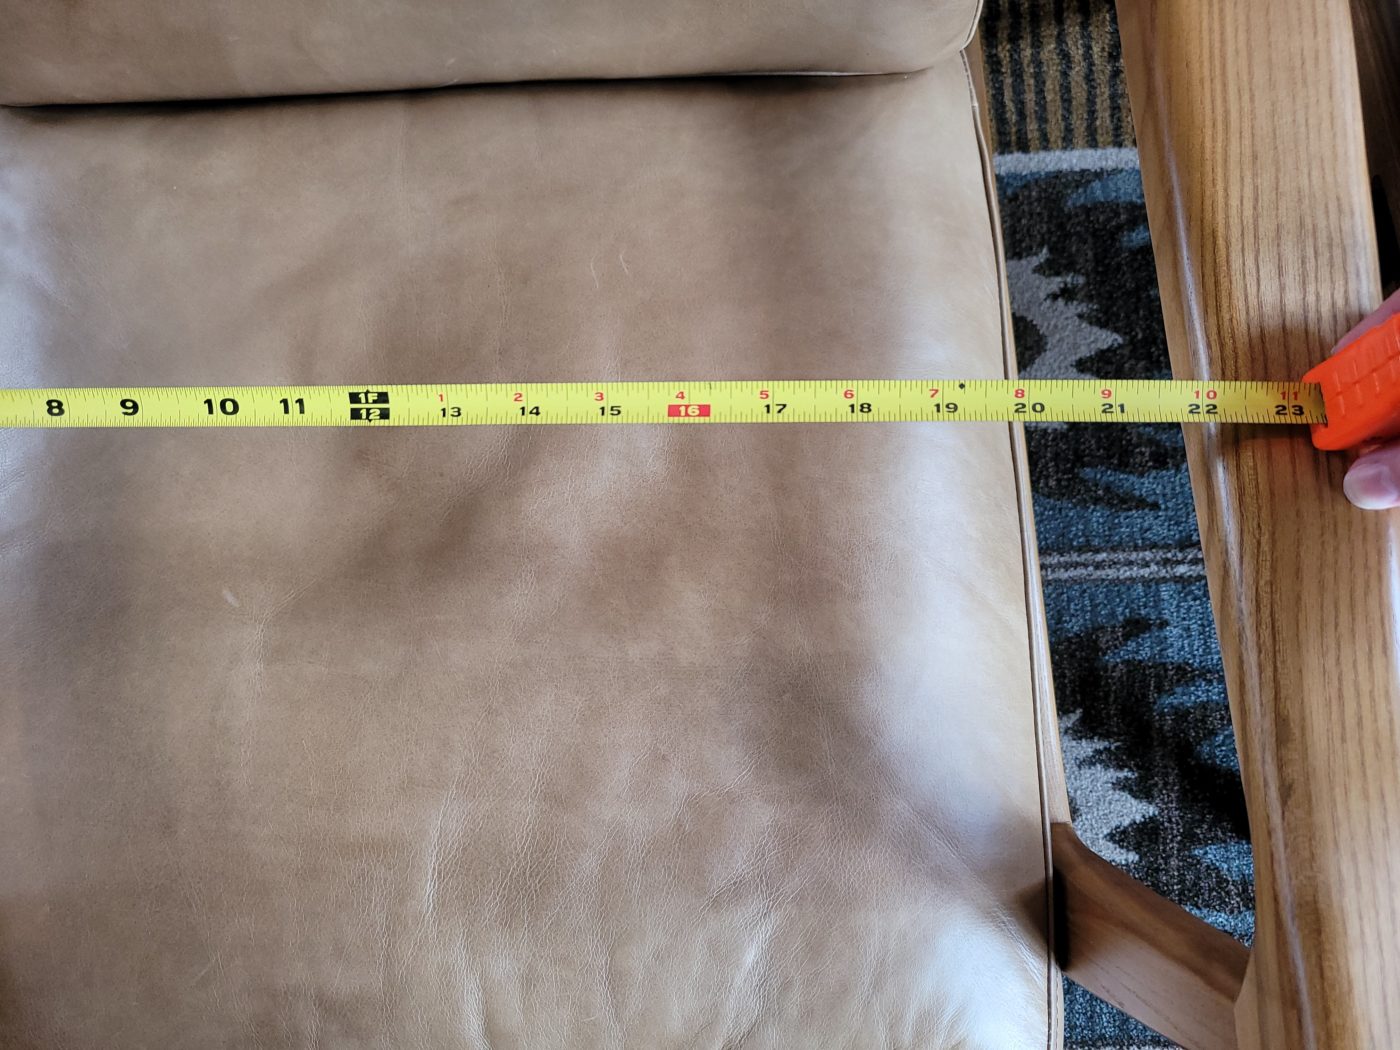 A tan upholstered chair with wooden arms, with a tape measure stretched across it at Alderbrook Resort where the Exhale fat-positive retreat will be held.